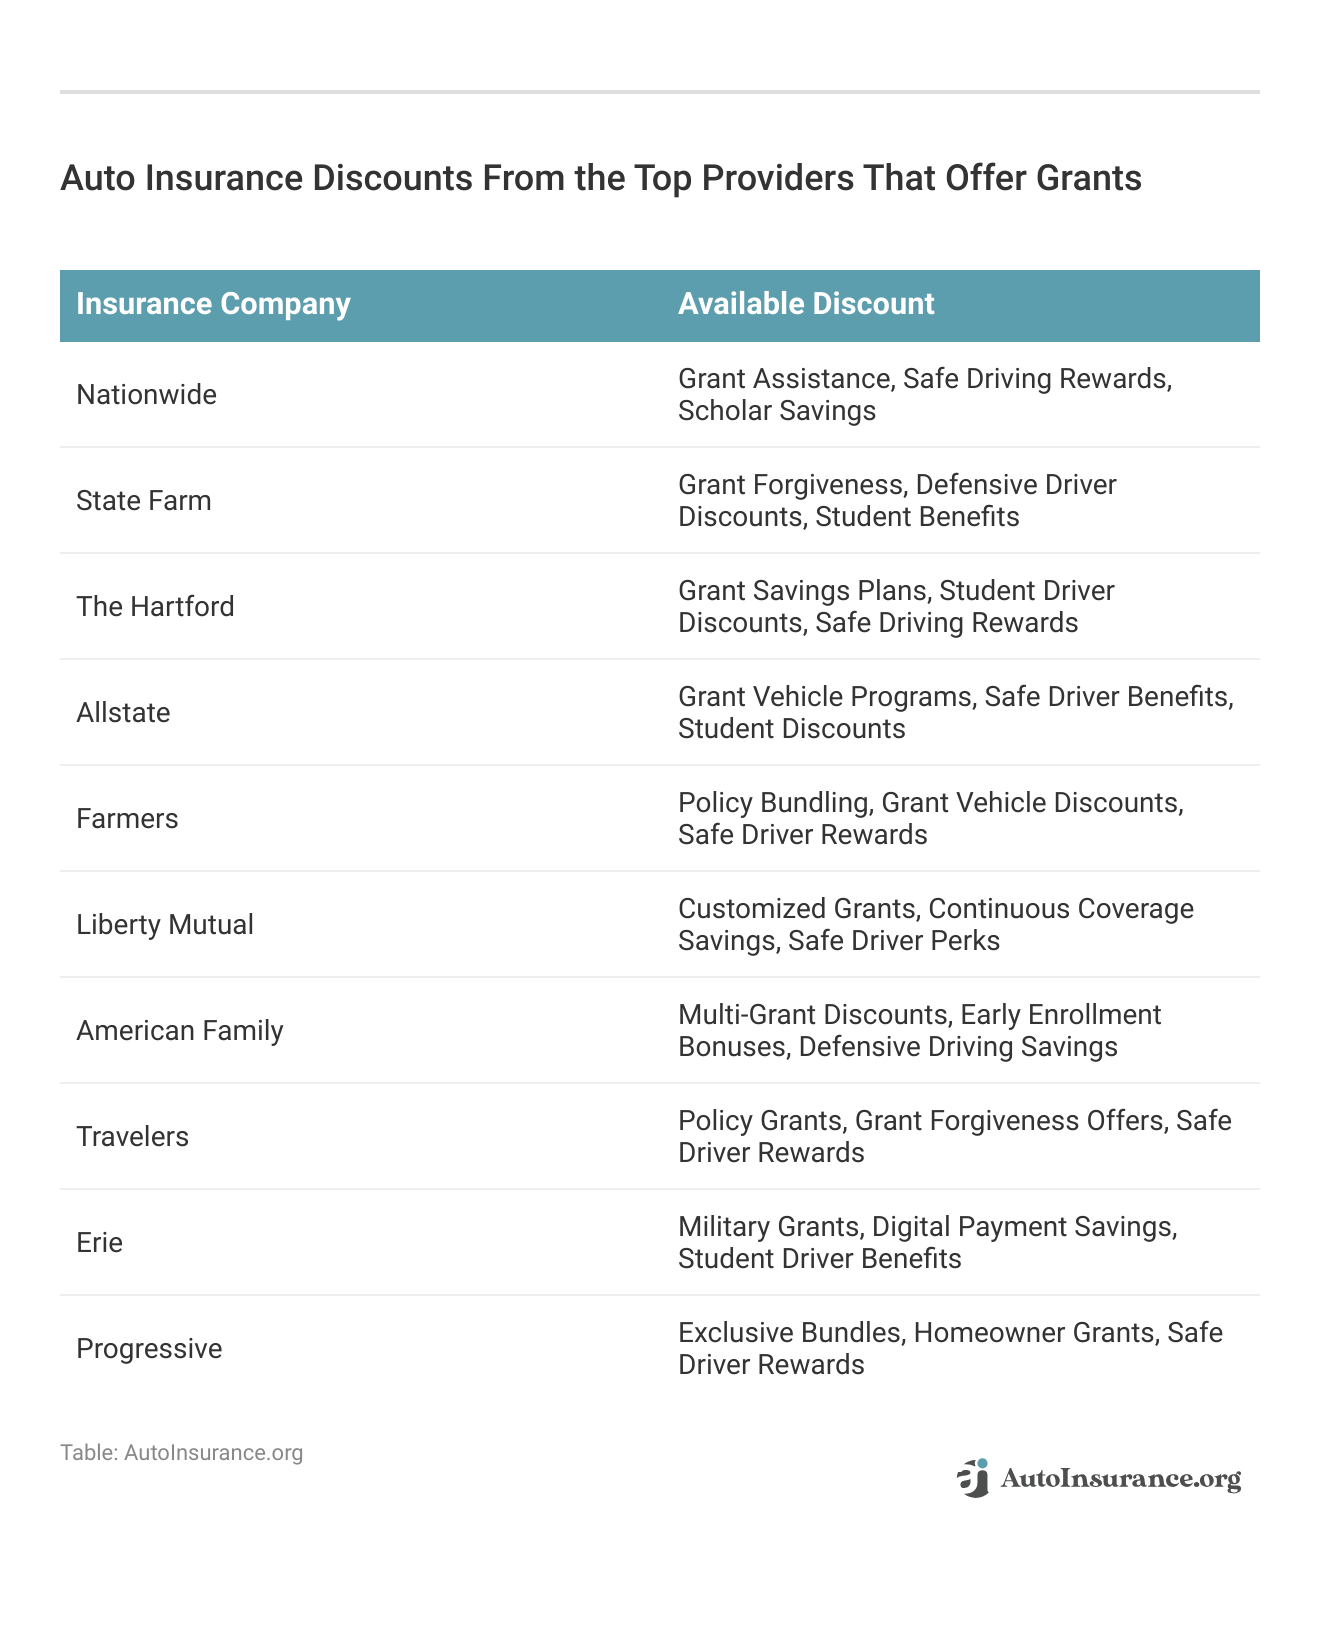 <h3>Auto Insurance Discounts From the Top Providers That Offer Grants</h3>